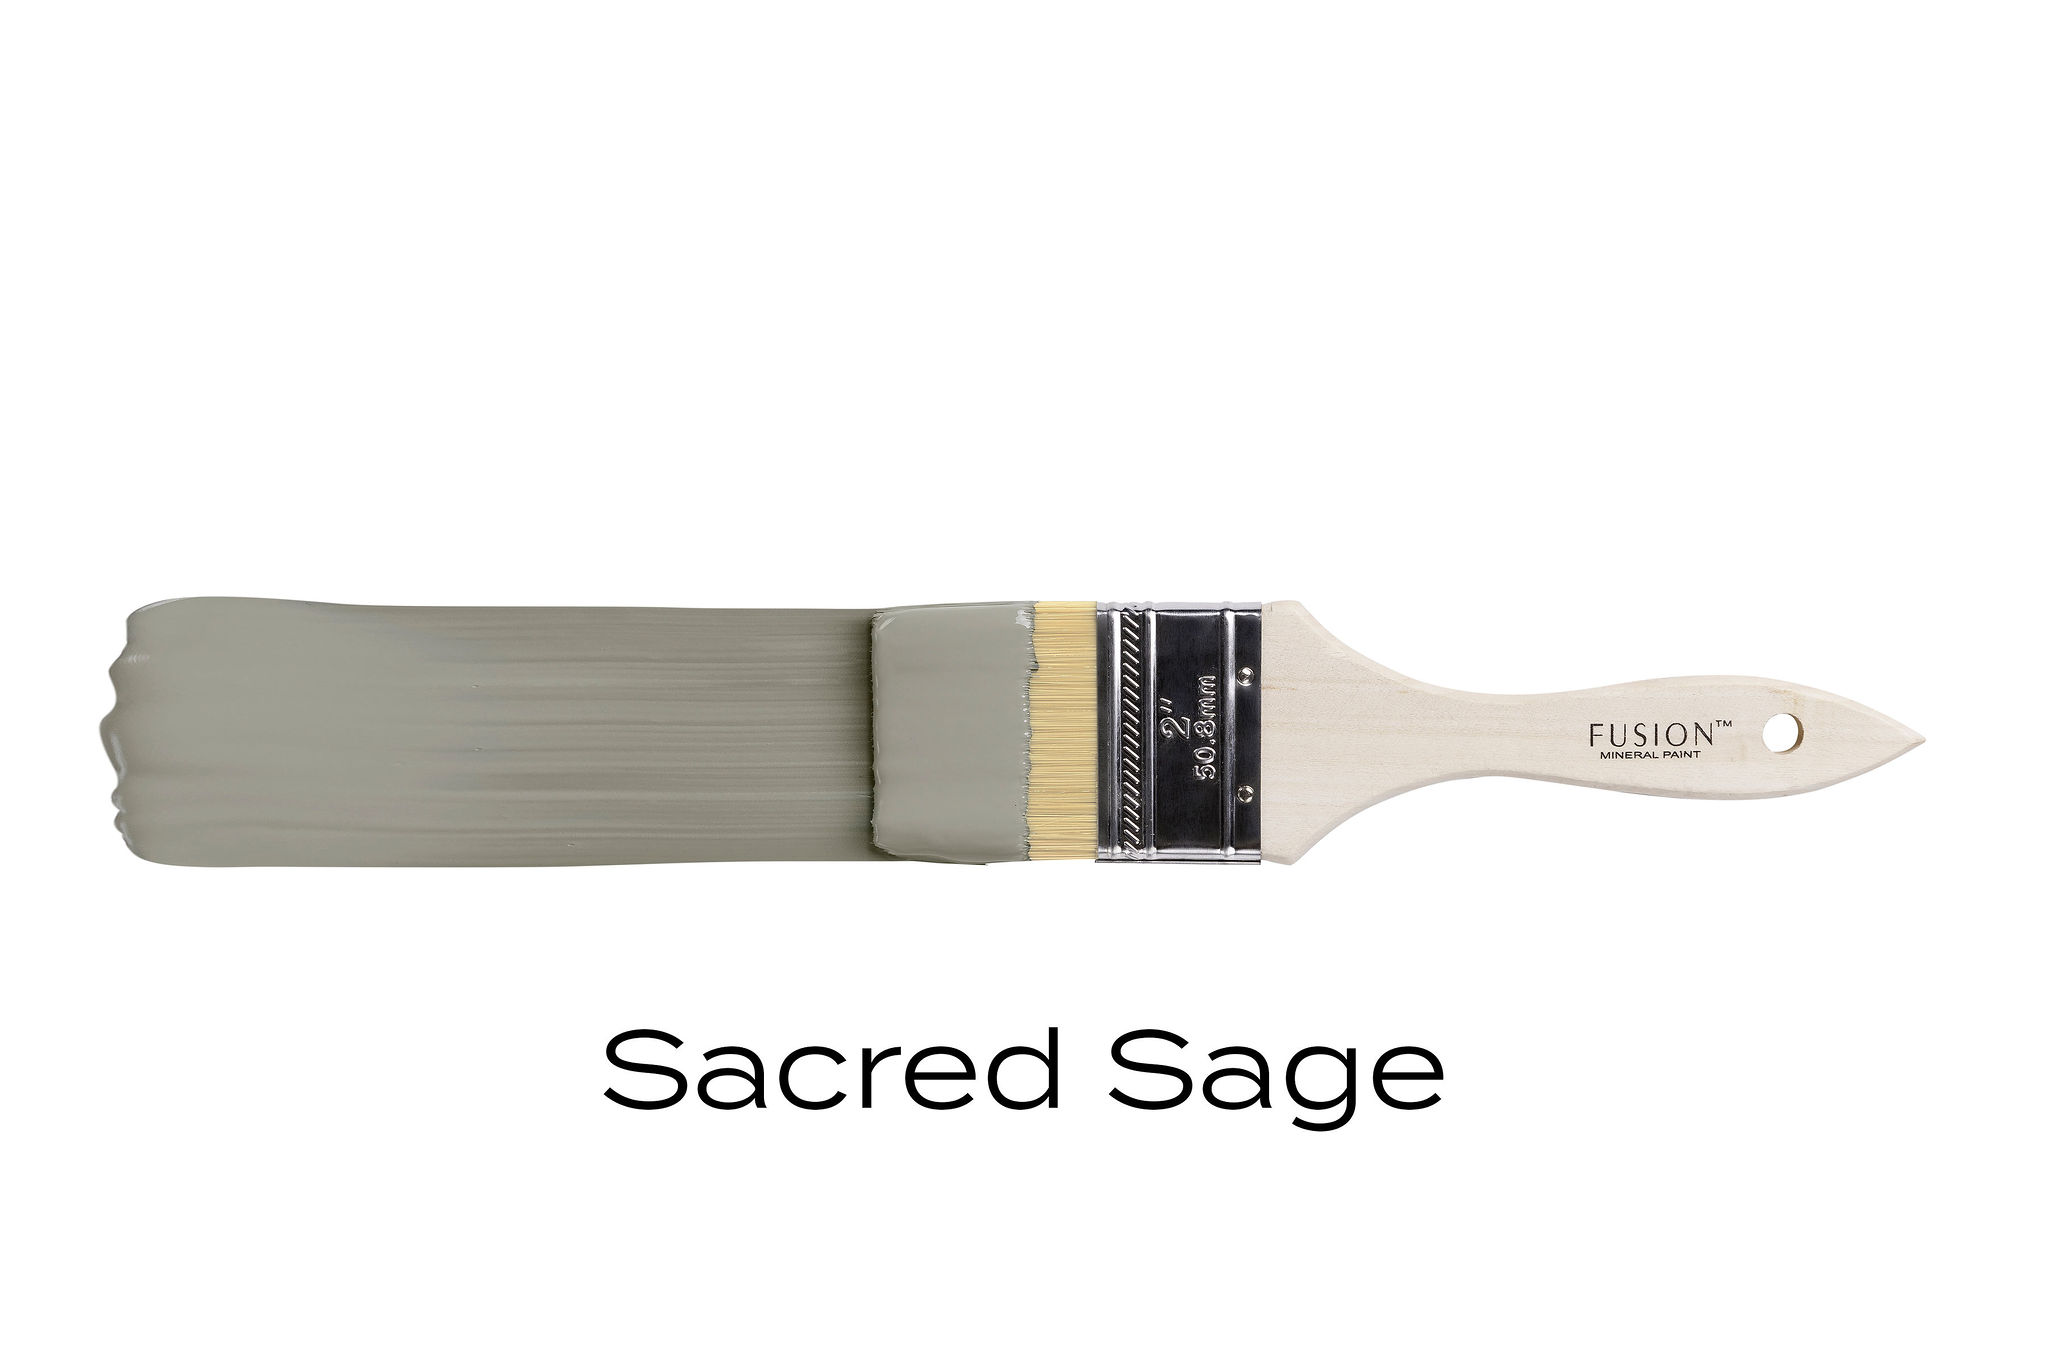 Sacred Sage Fusion Mineral Paint